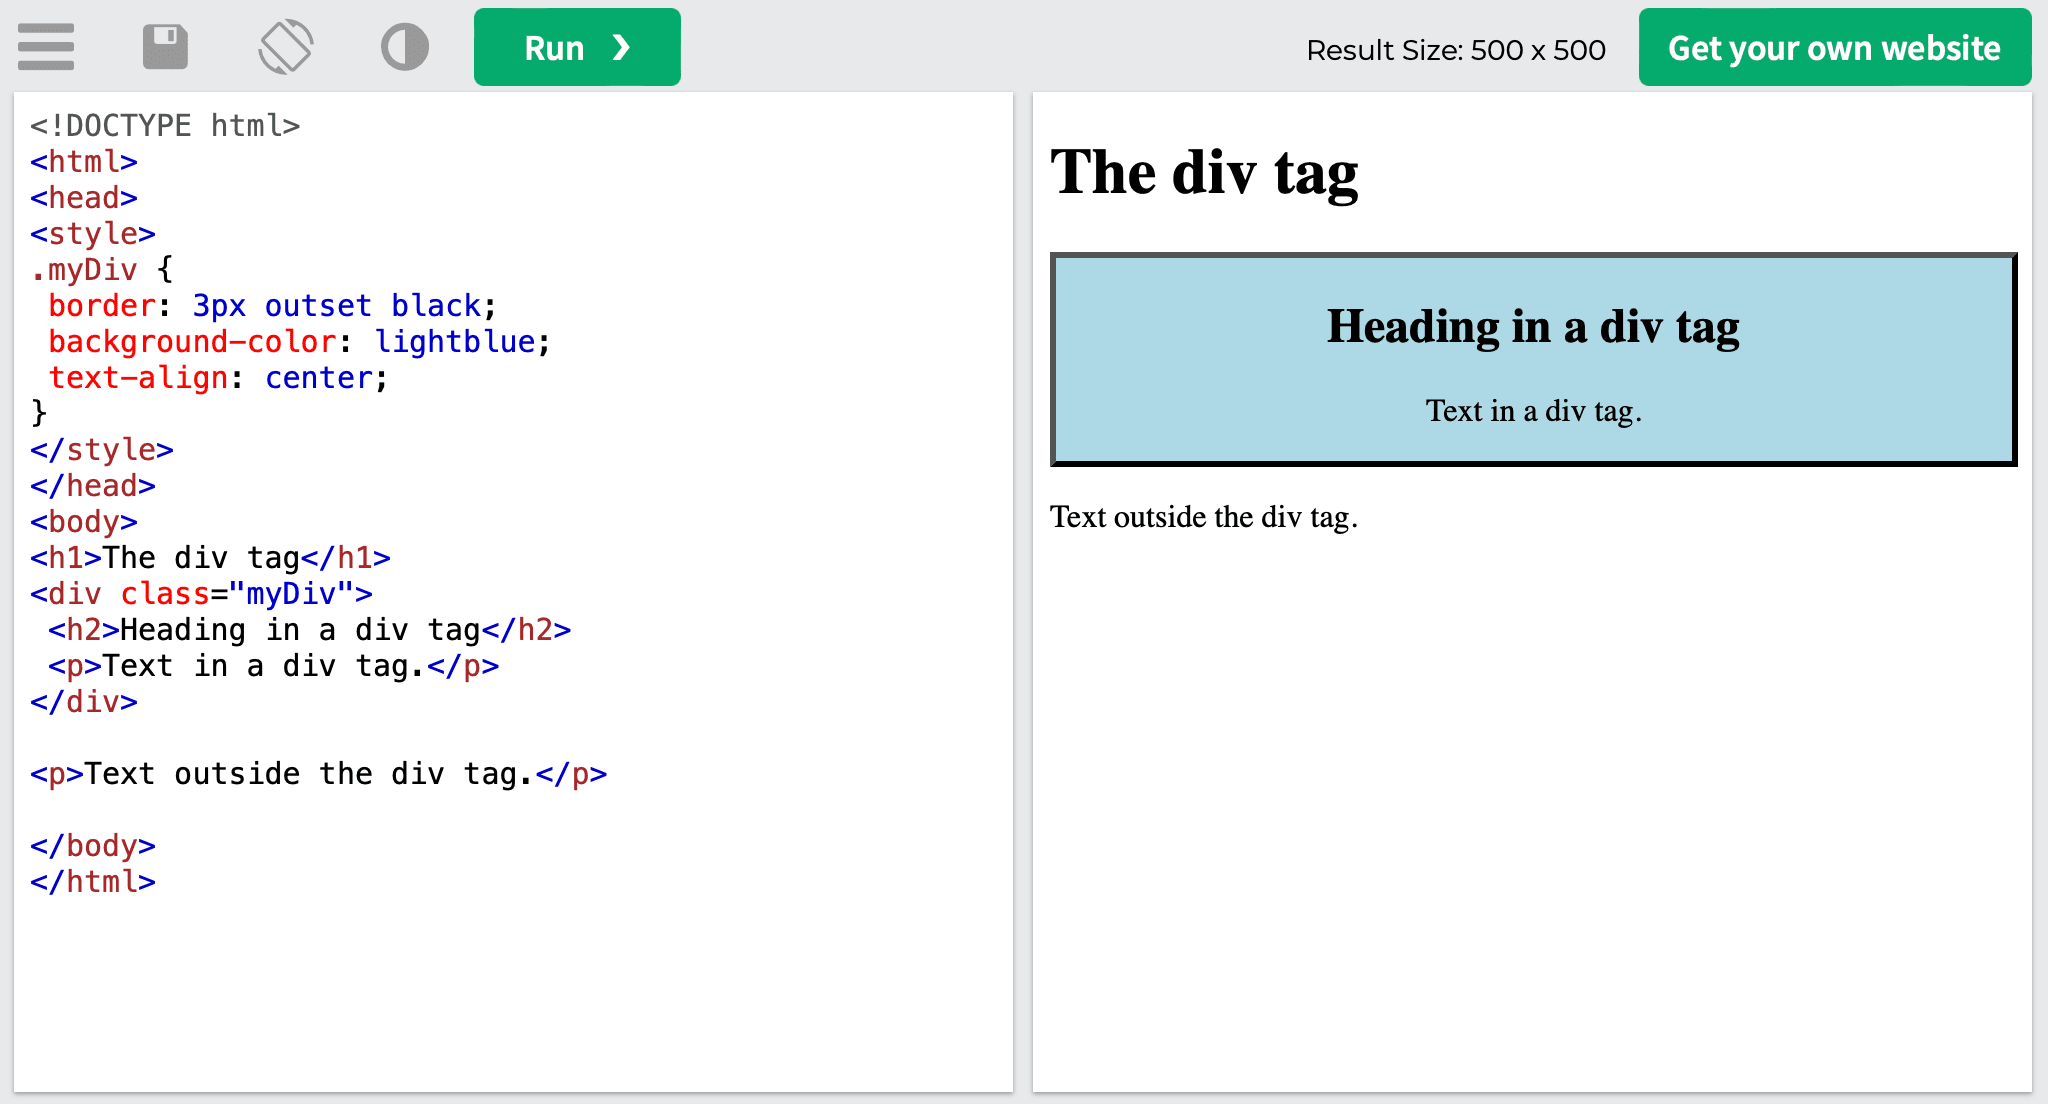 The <div> tag example